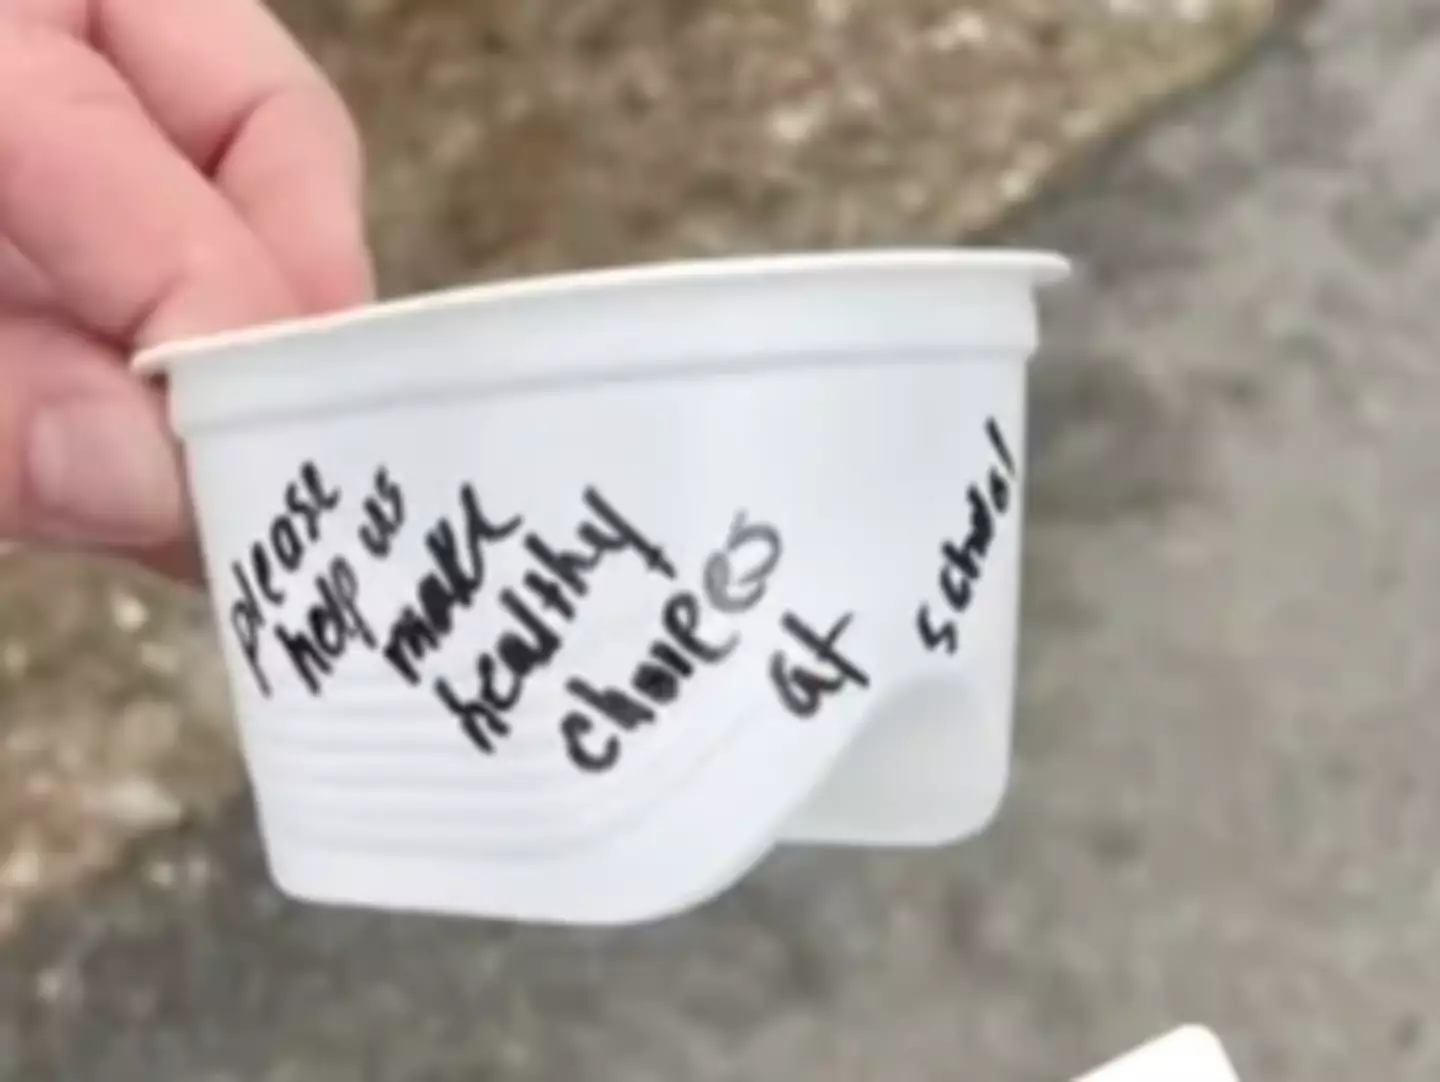 Staff wrote the note on the cup Megan had given to her son.